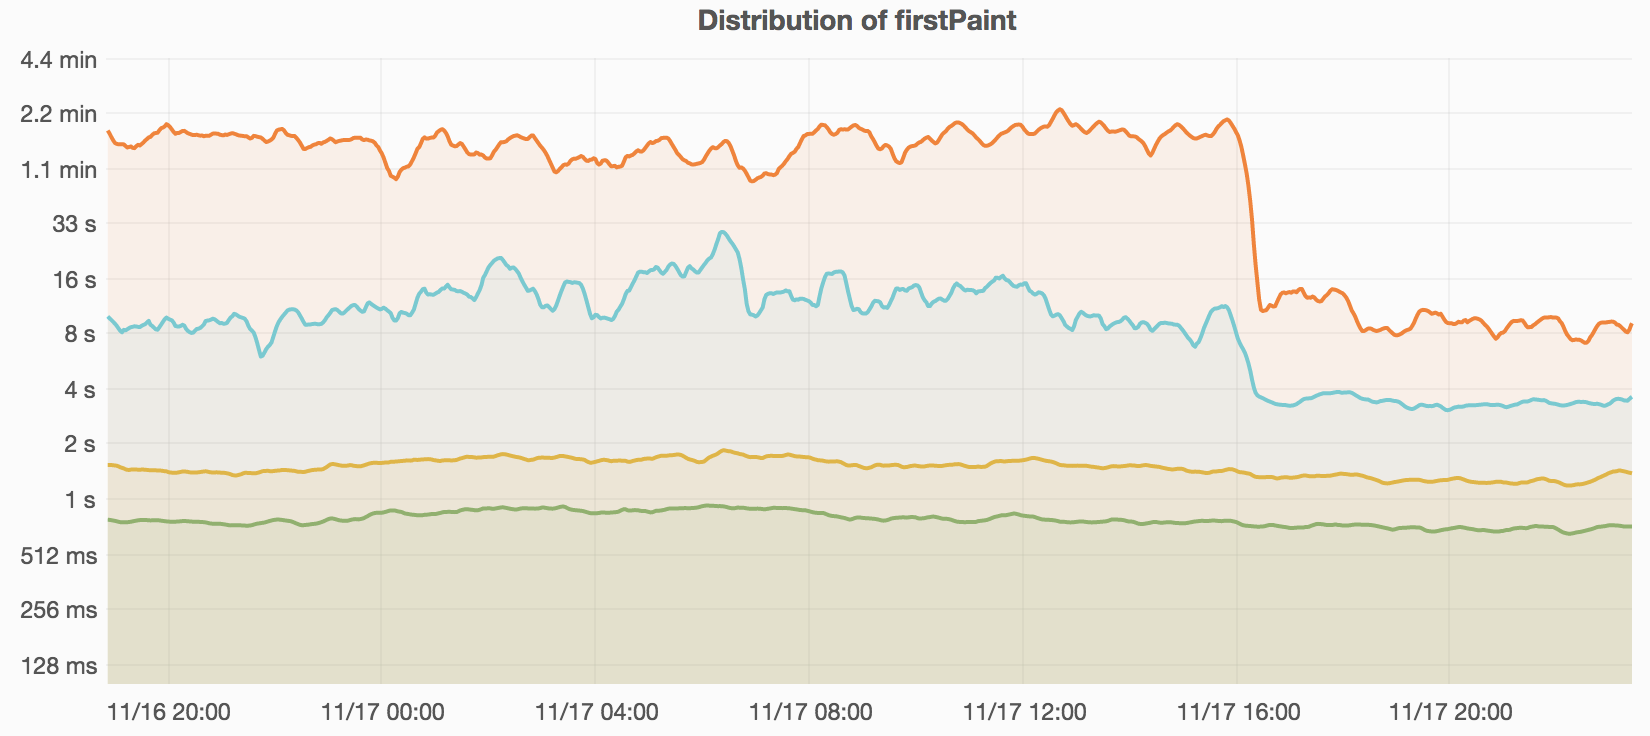 A graph of the distribution of firstPaint